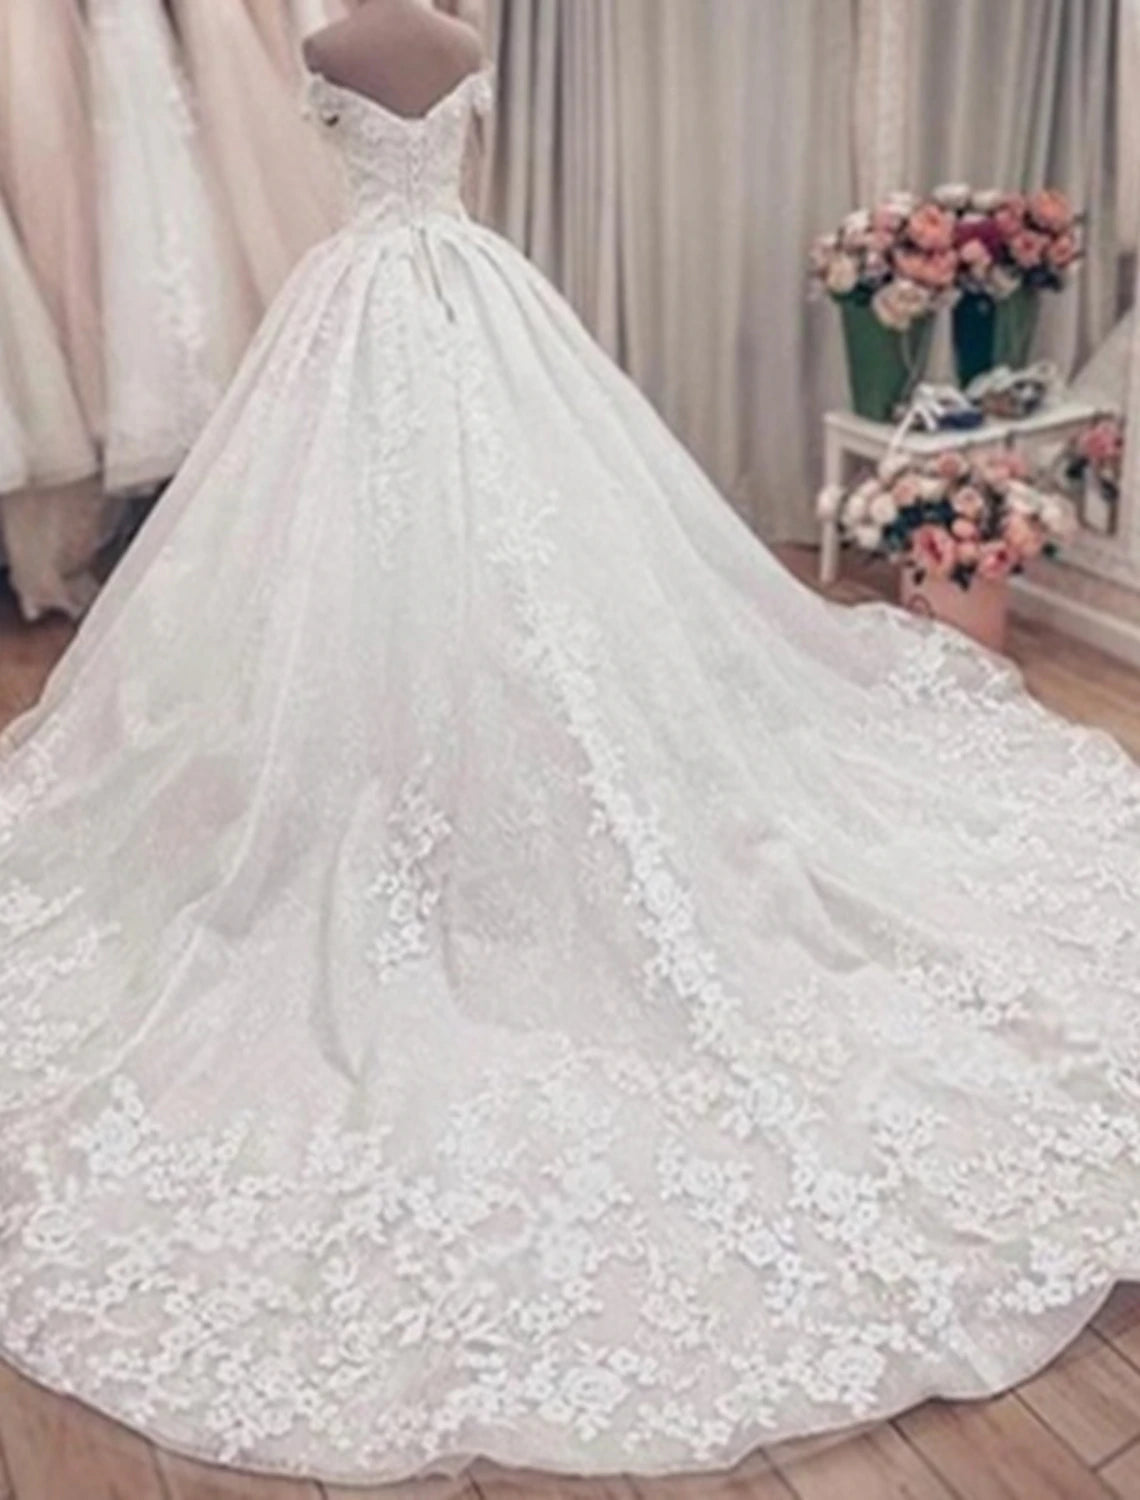 Engagement Formal Wedding Dresses Ball Gown Off Shoulder Cap Sleeve Chapel Train Lace Bridal Gowns With Appliques